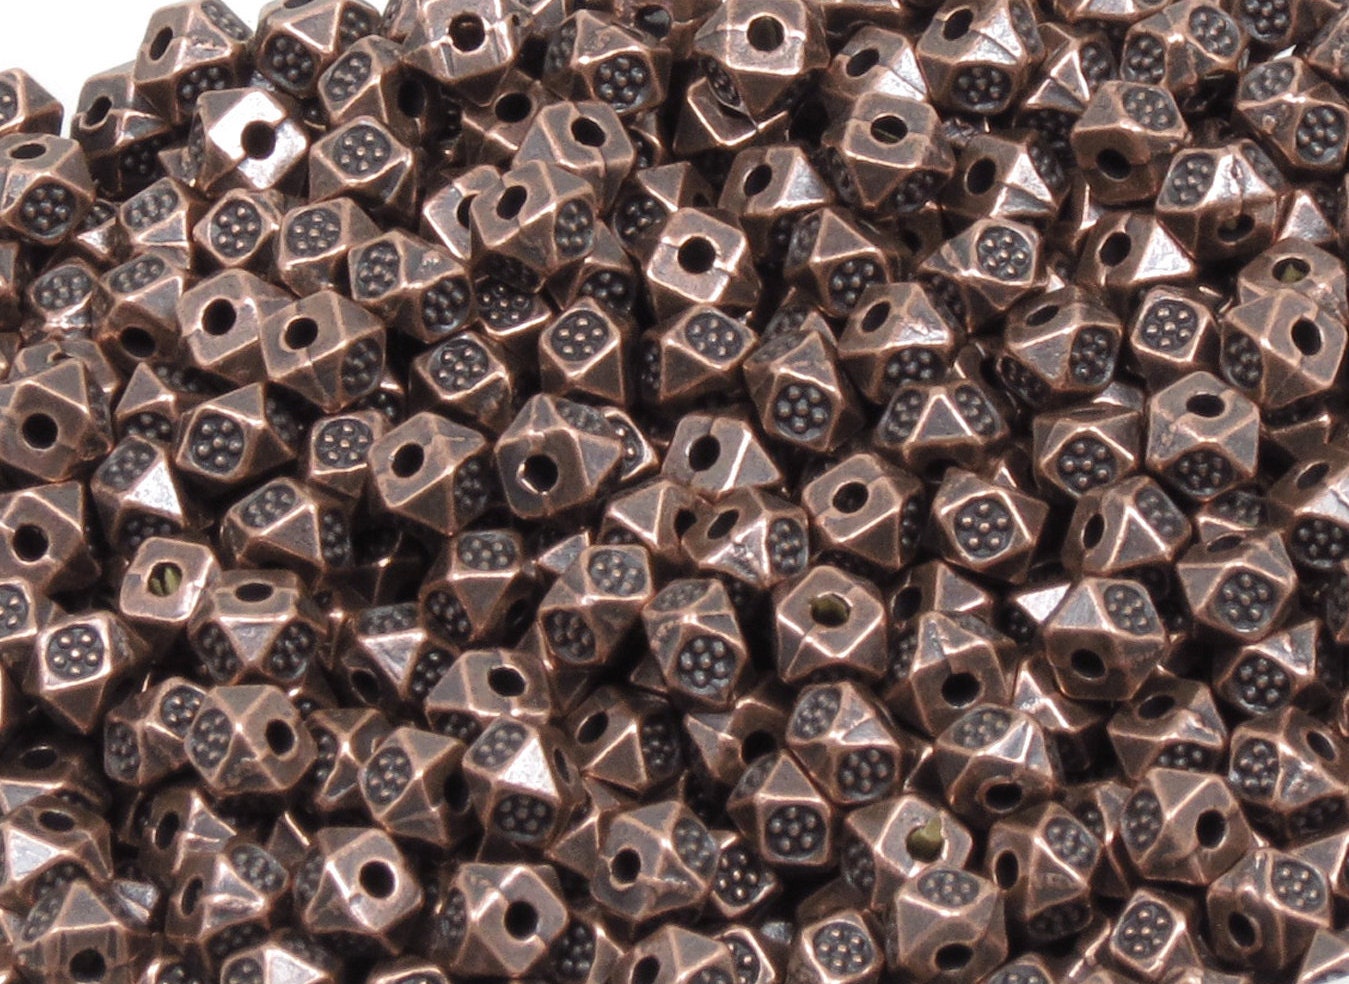 Copper Spacer Beads Package of 10 Flat Swirl Patterned 8mm Beads for  Jewelry Making Beautiful Quality 